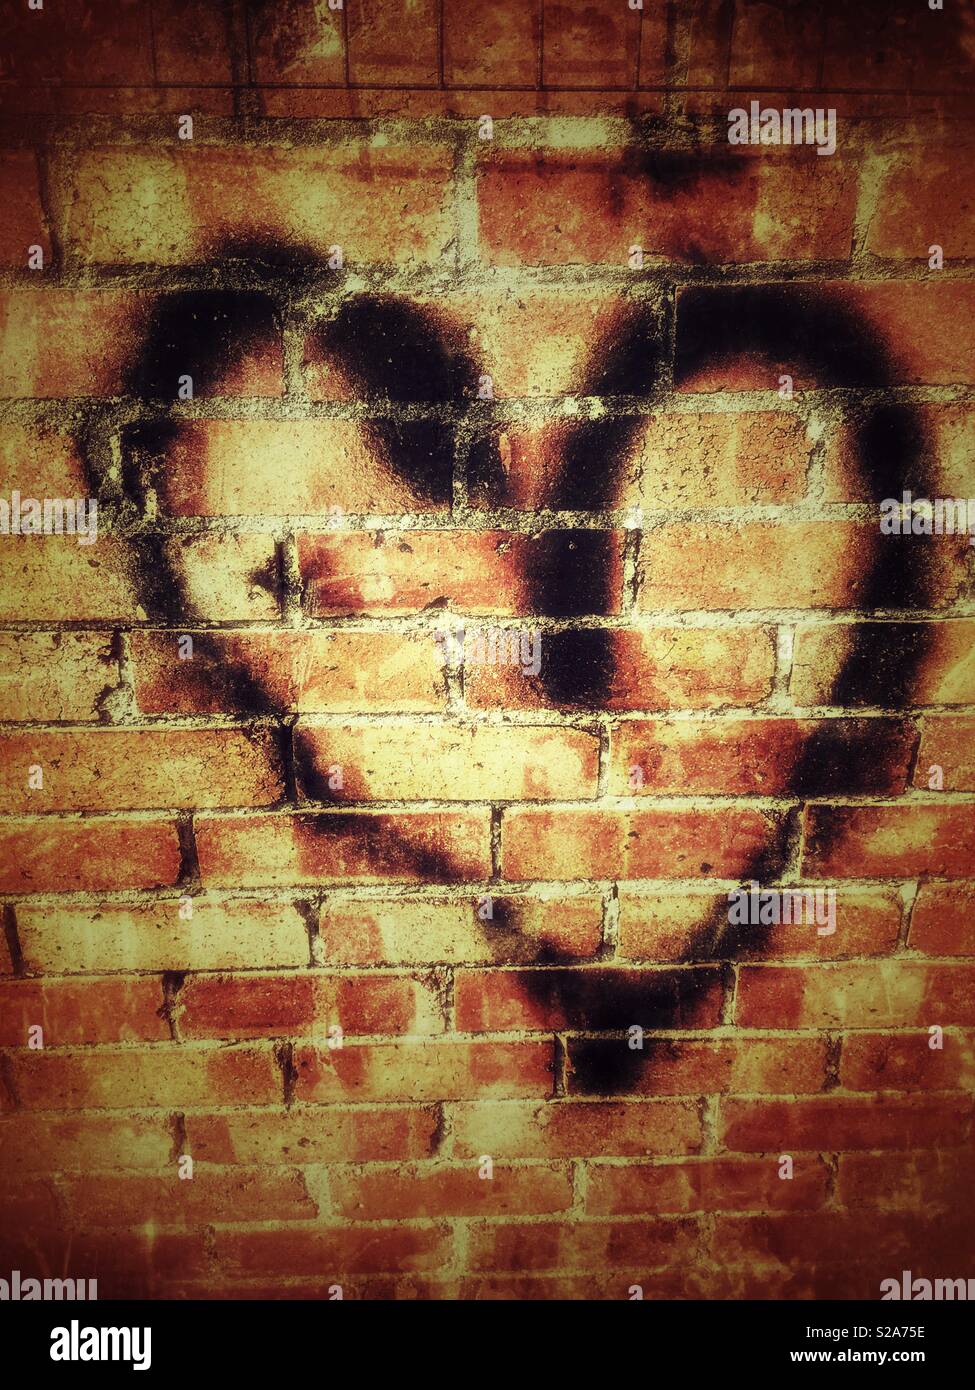 Black heart shape in paint sprayed on a red brick wall Stock Photo